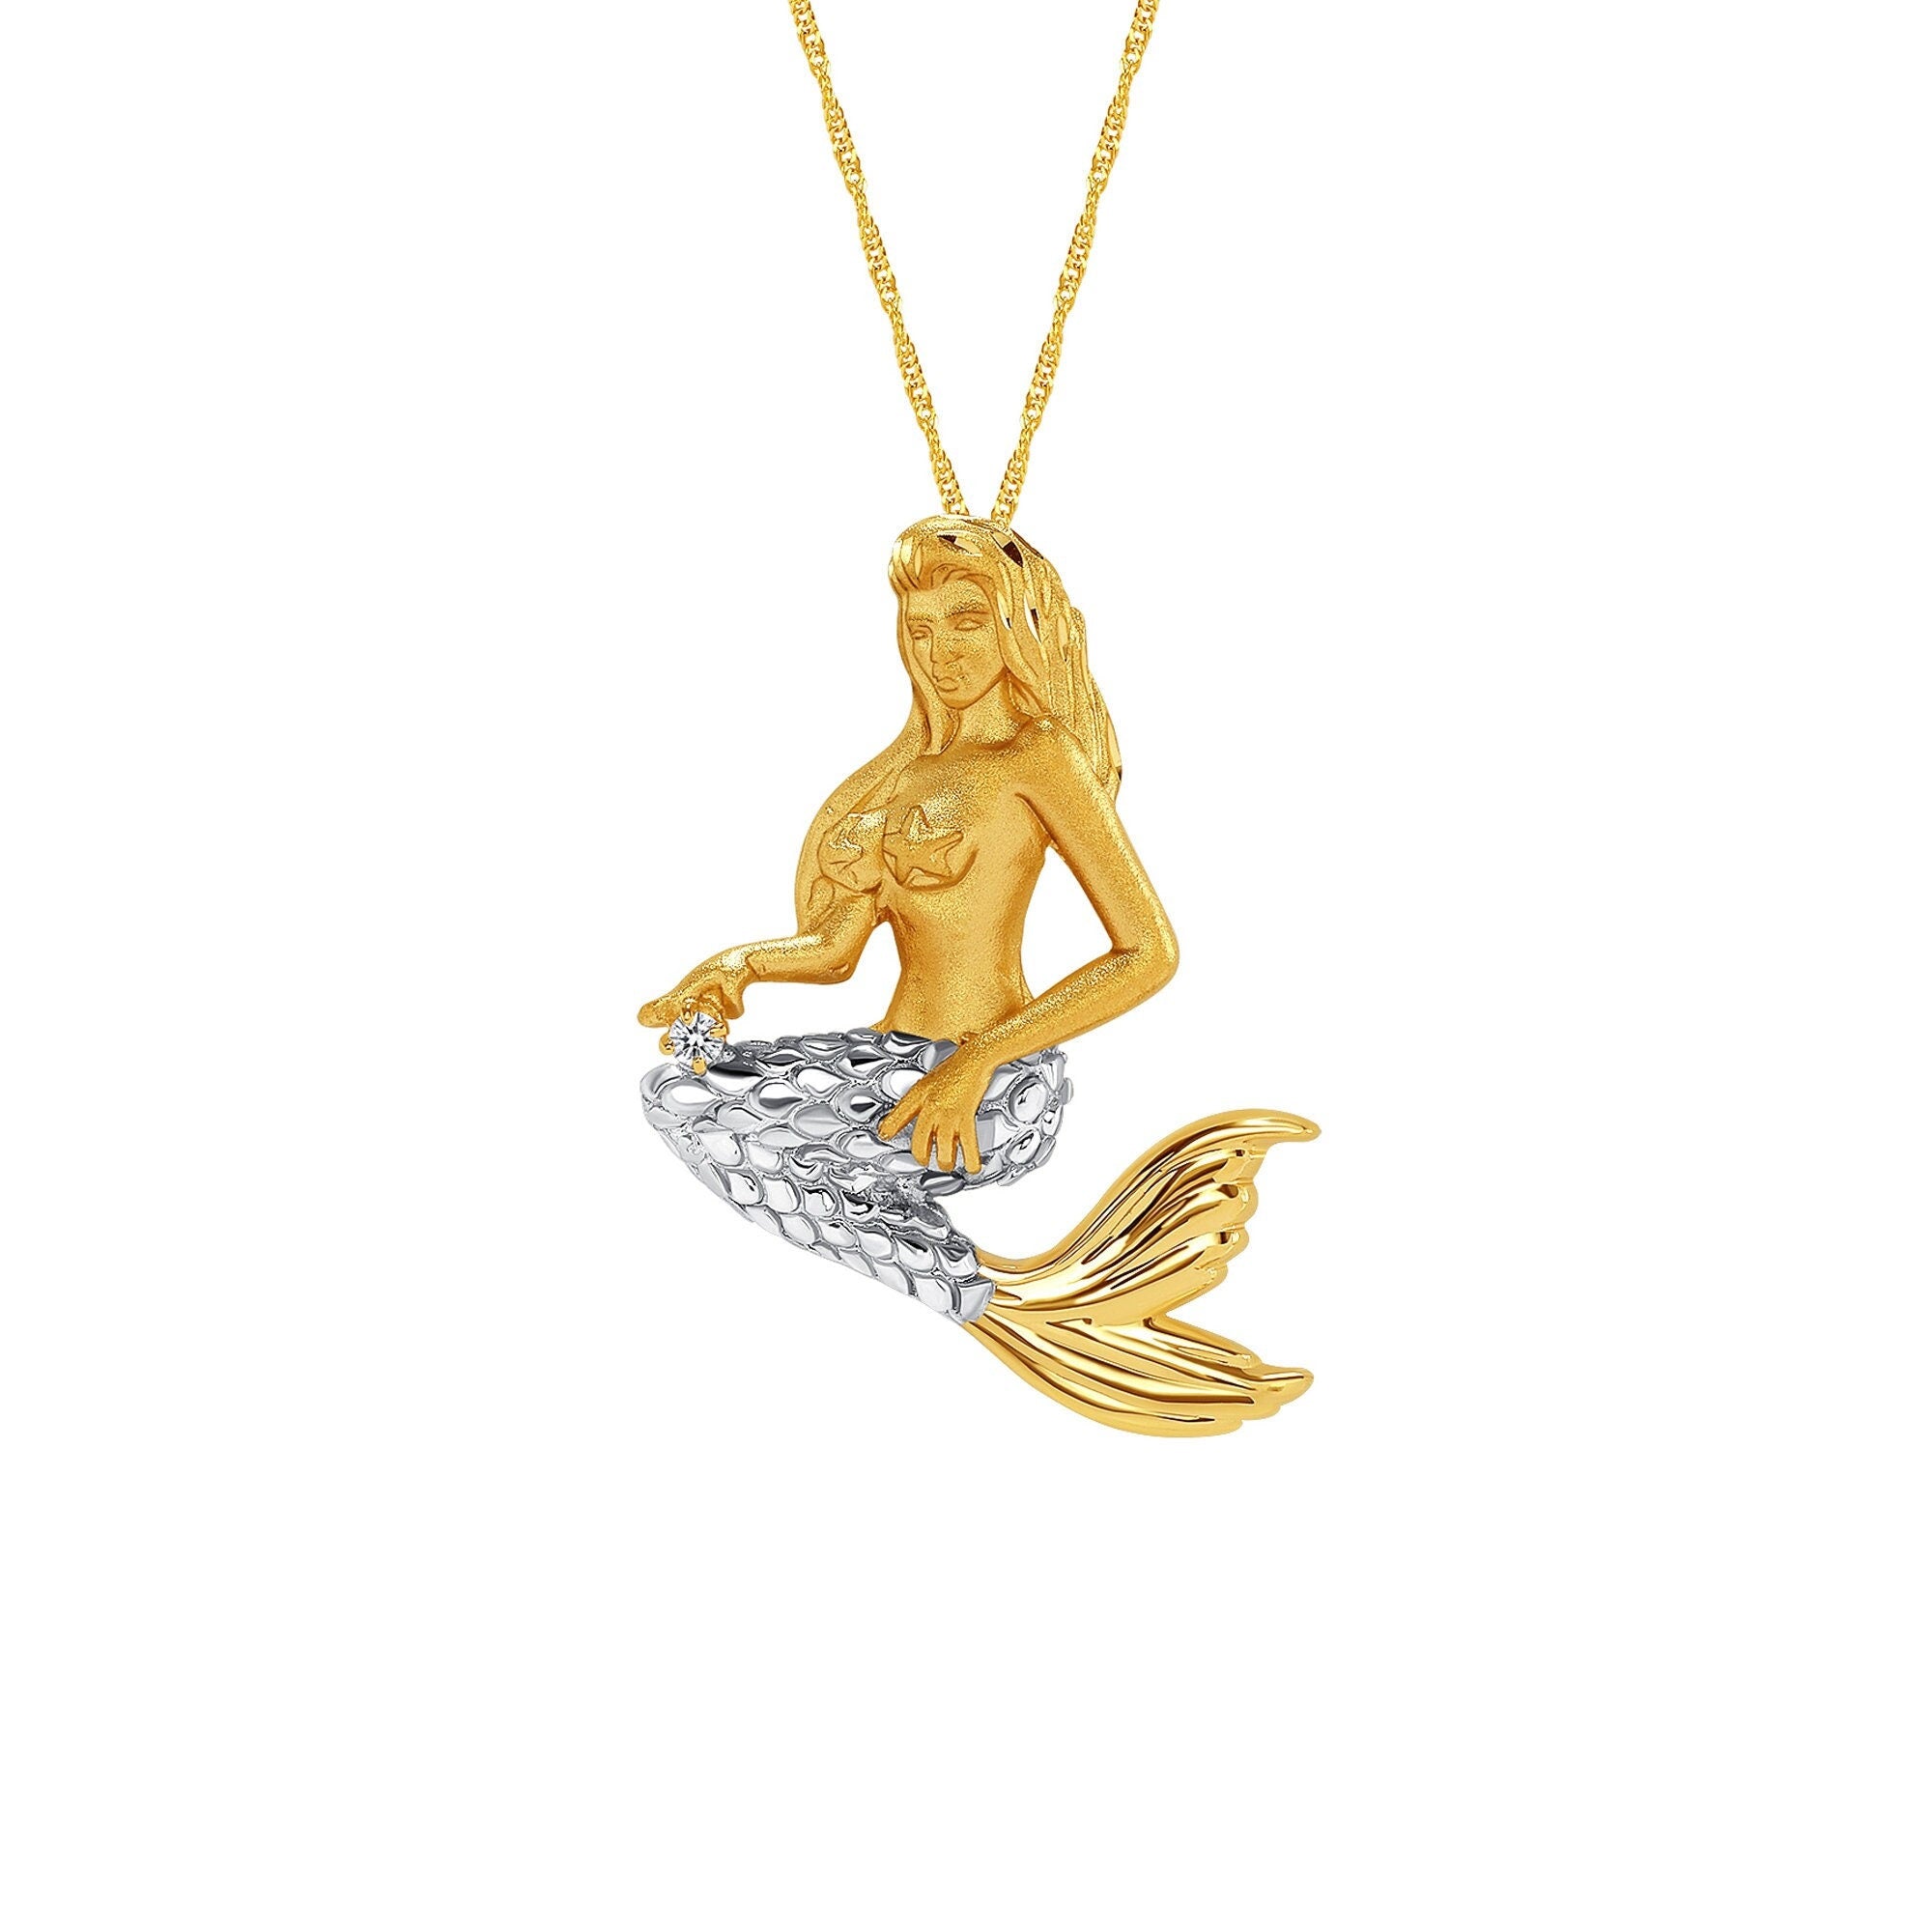 14k solid gold mermaid pendant with .03ct diamond on 18" gold chain